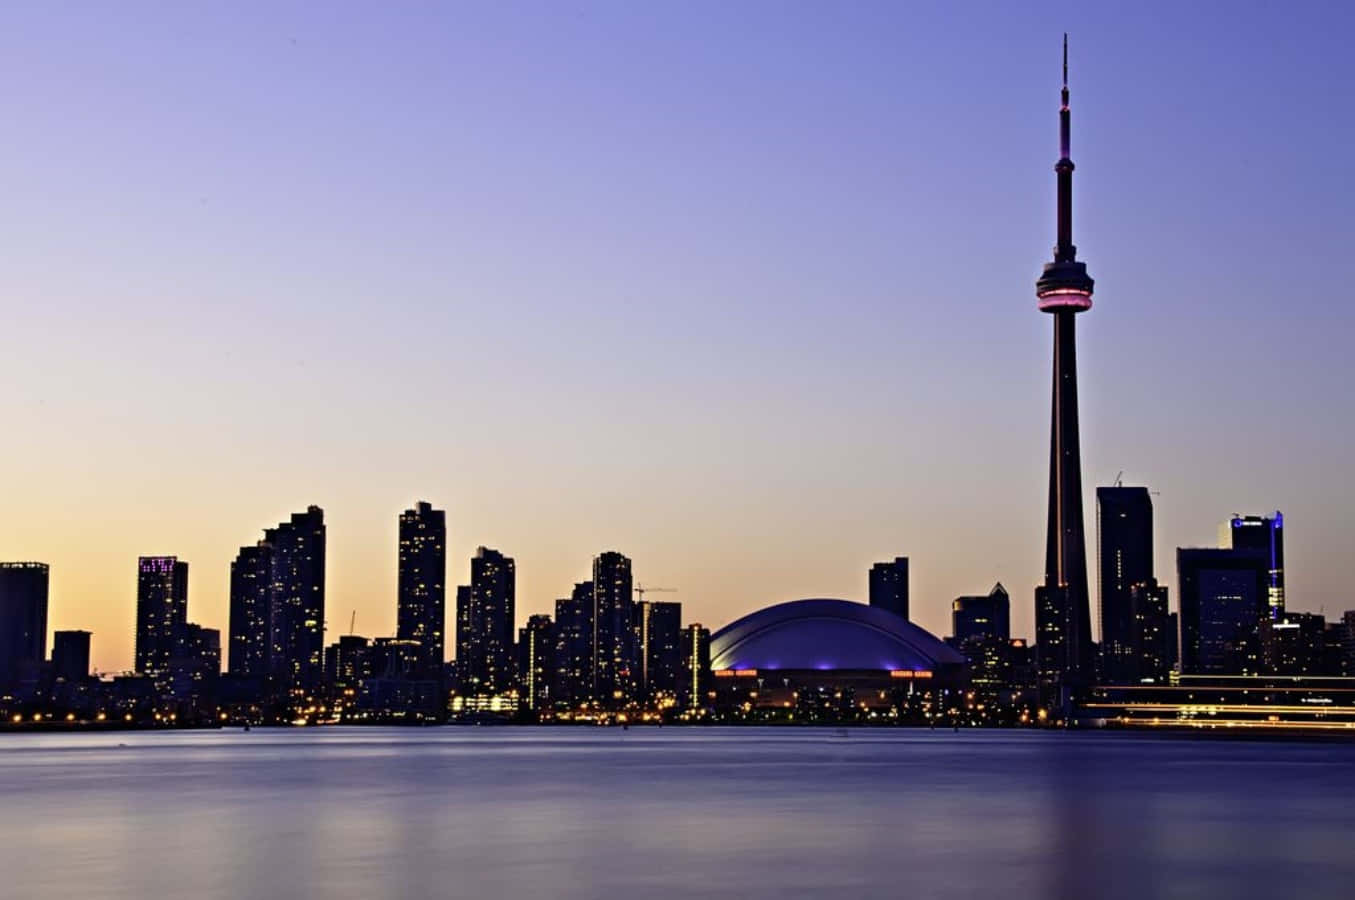 The glowing Toronto skyline reflects in the calm evening waters.